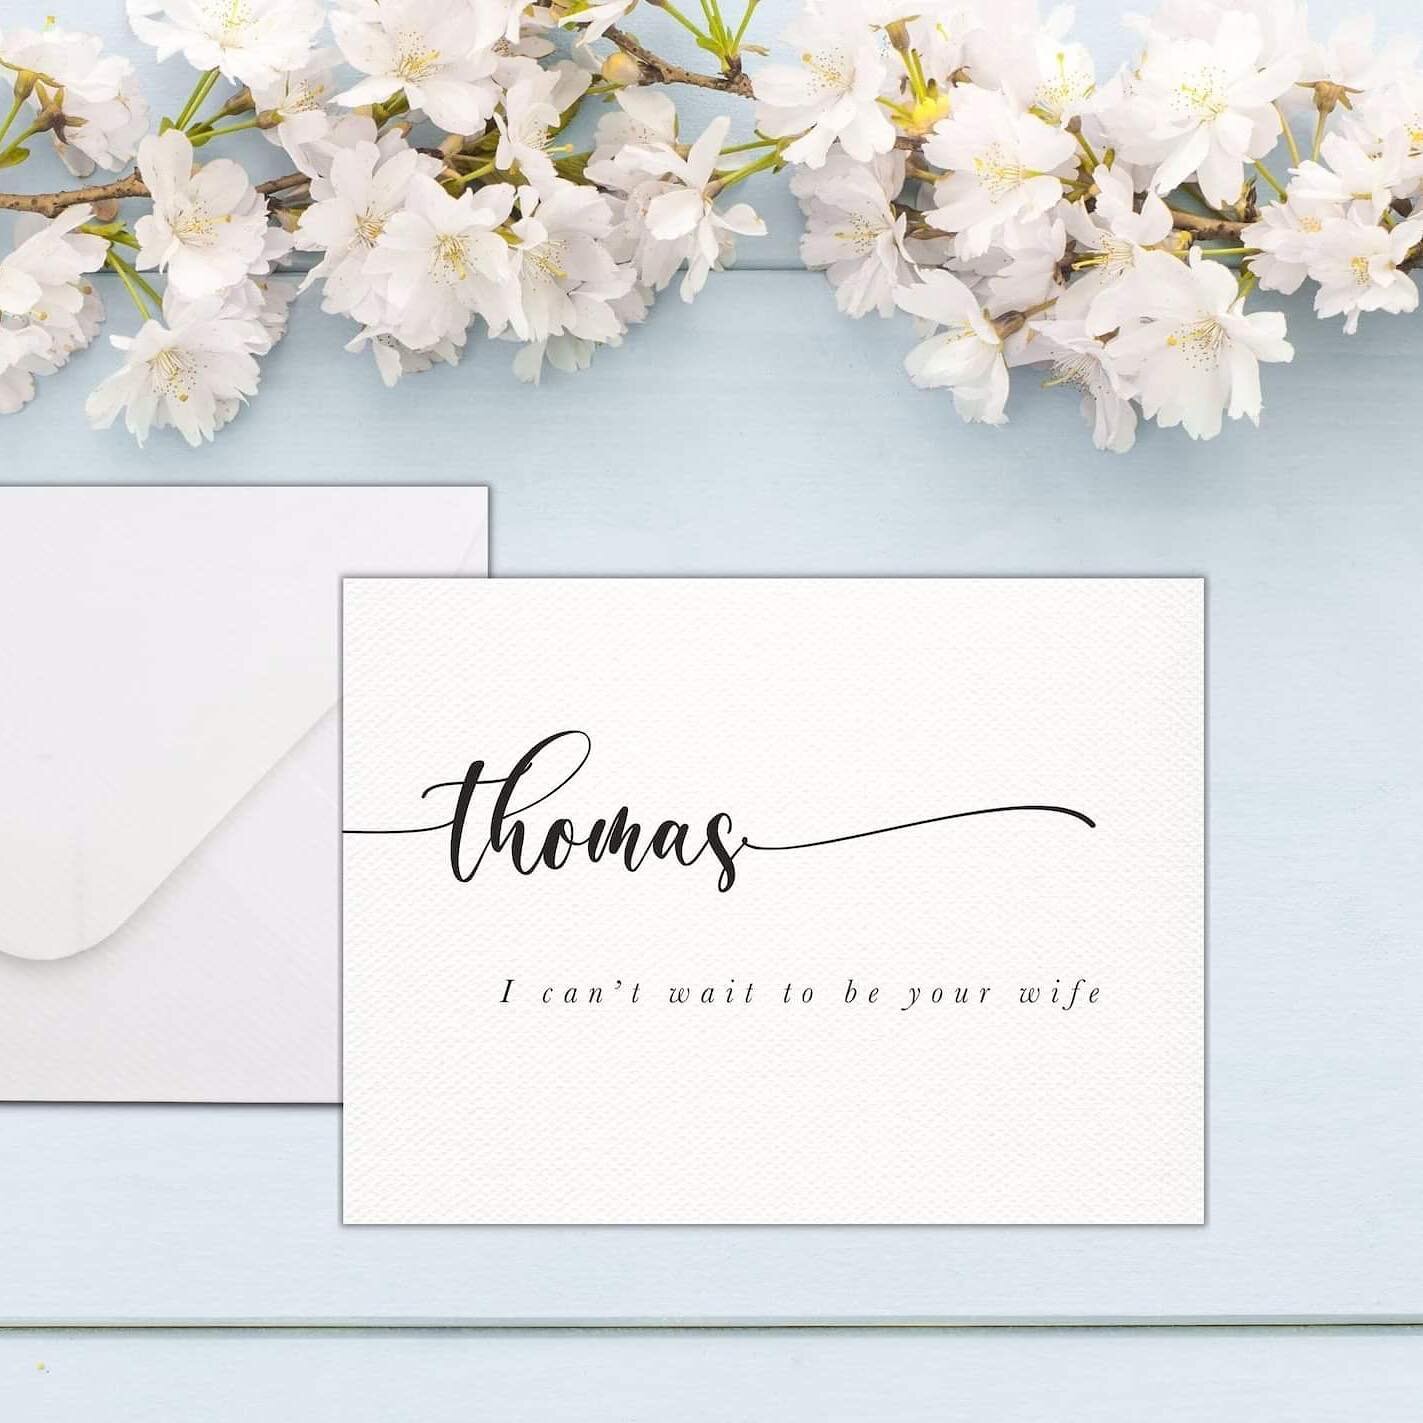 Always new cards for your husband/wife to be!